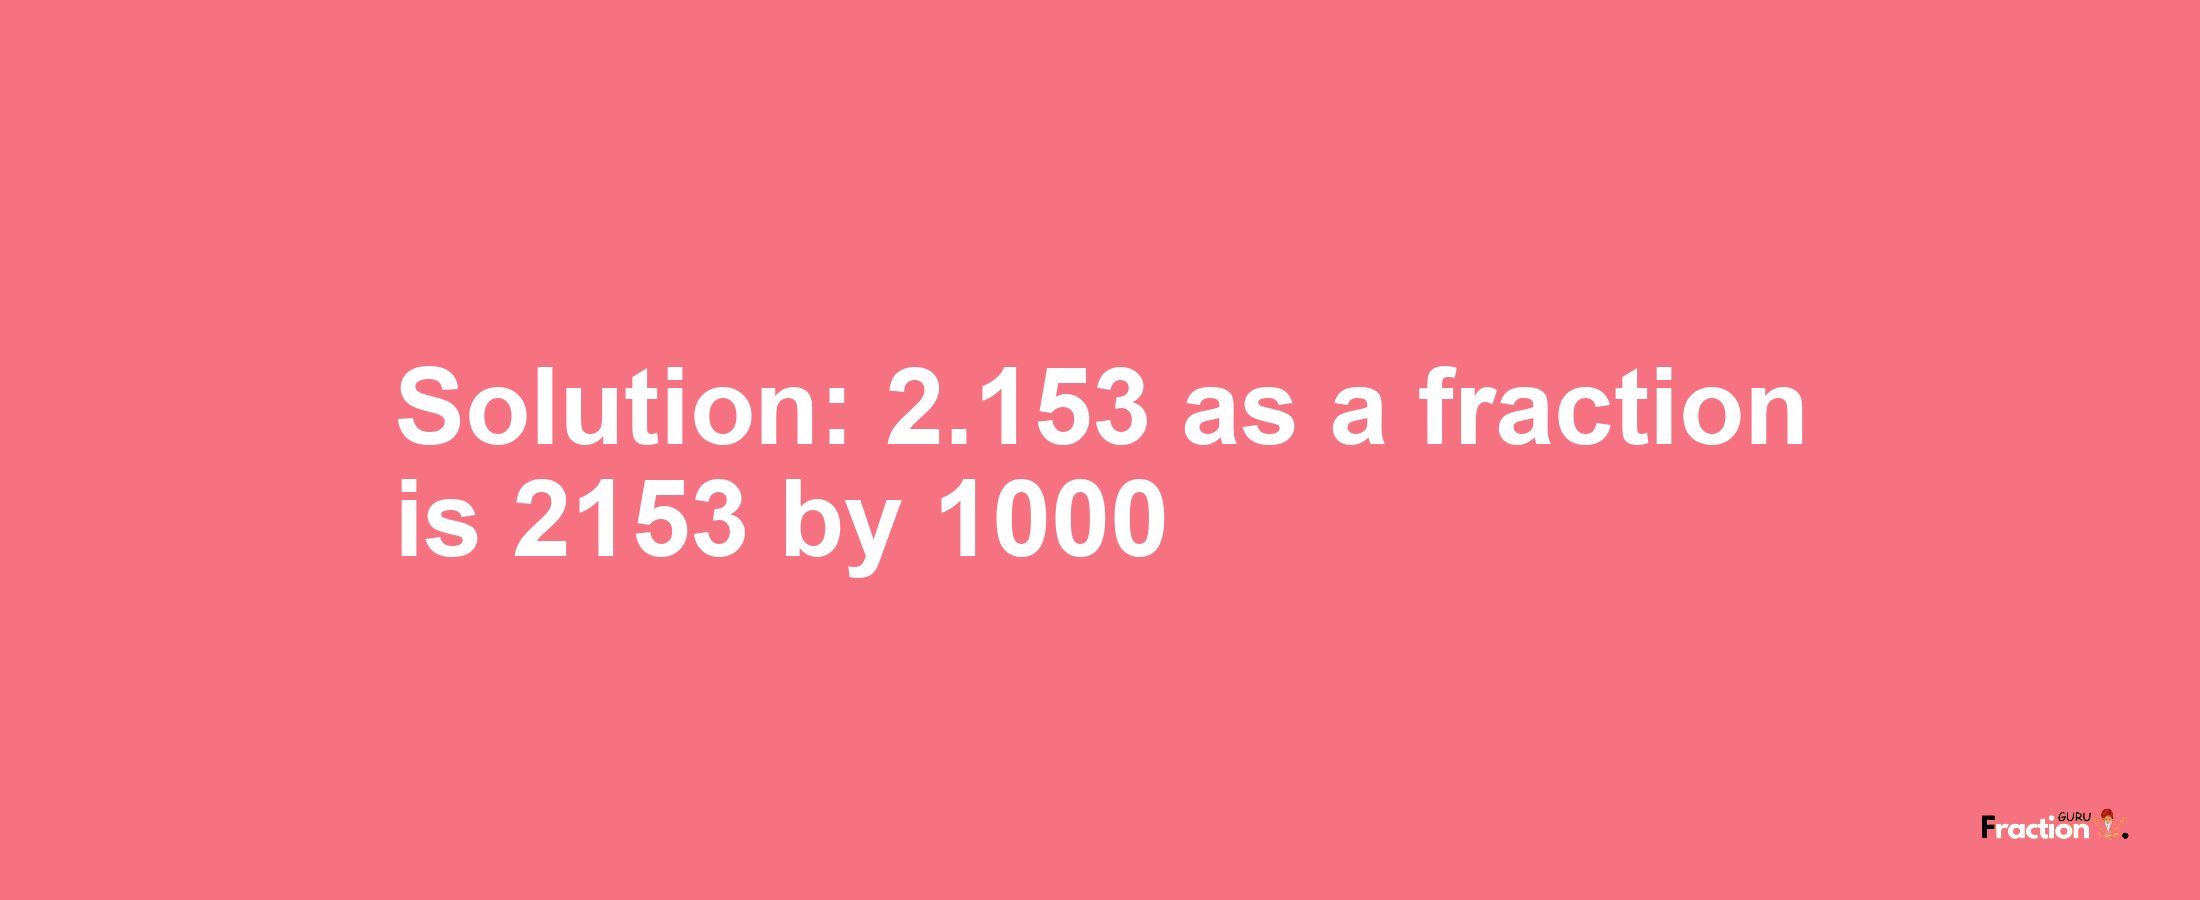 Solution:2.153 as a fraction is 2153/1000